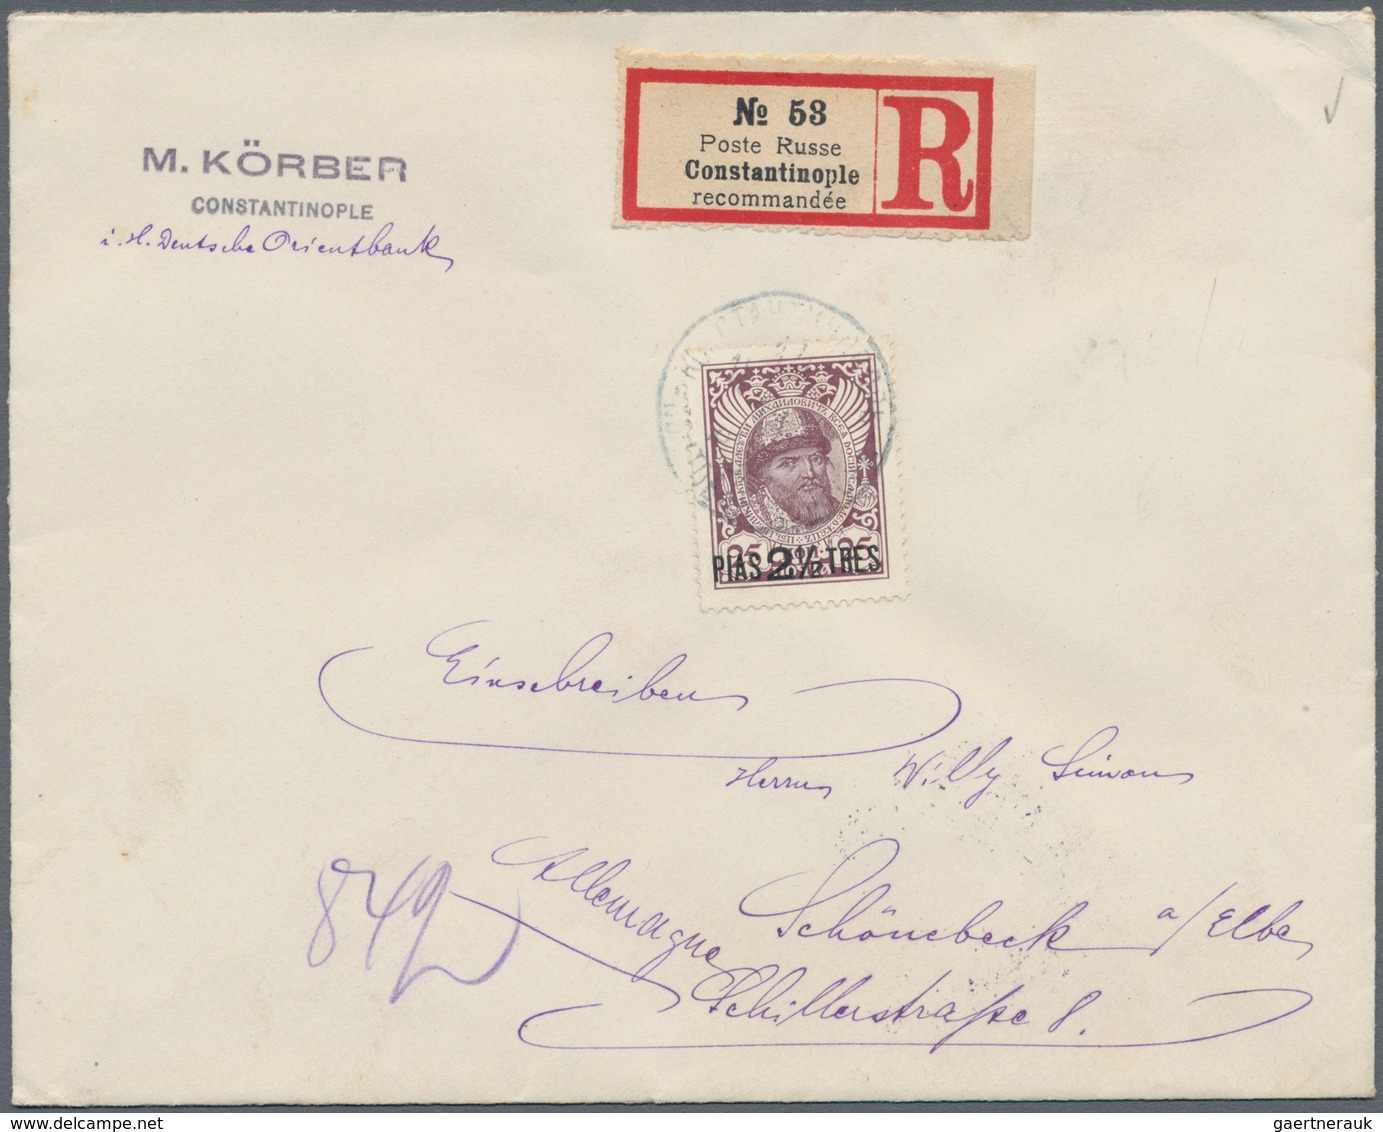 Russische Post In Der Levante - Staatspost: 1913, Romanov 2 1/2 Pia On 25 K. Used Constantinople To - Levante